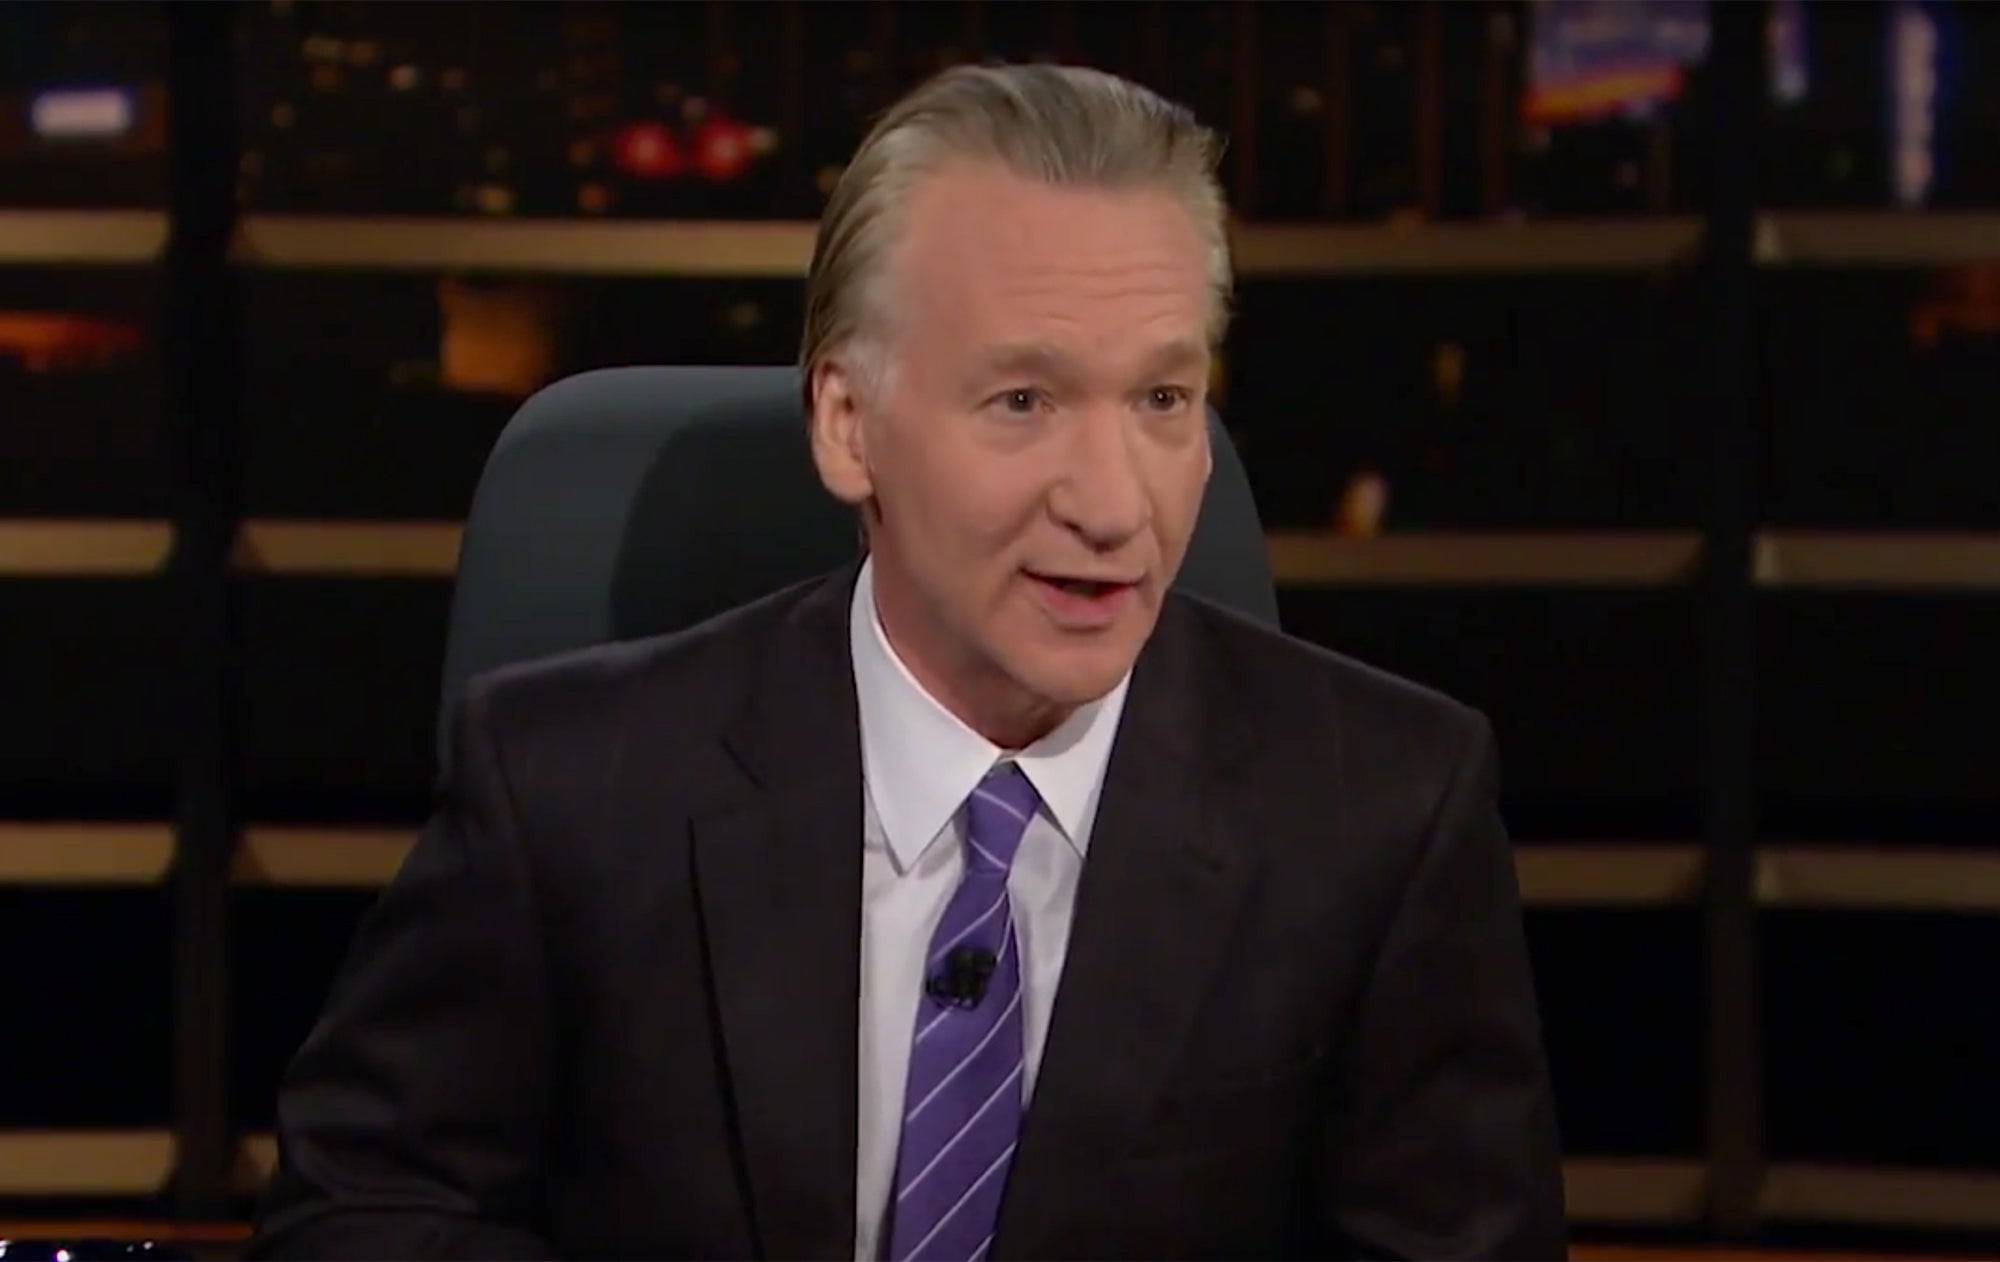 HBO Responds to Bill Maher's 'Inexcusable and Tasteless' Use of the N-Word on Air